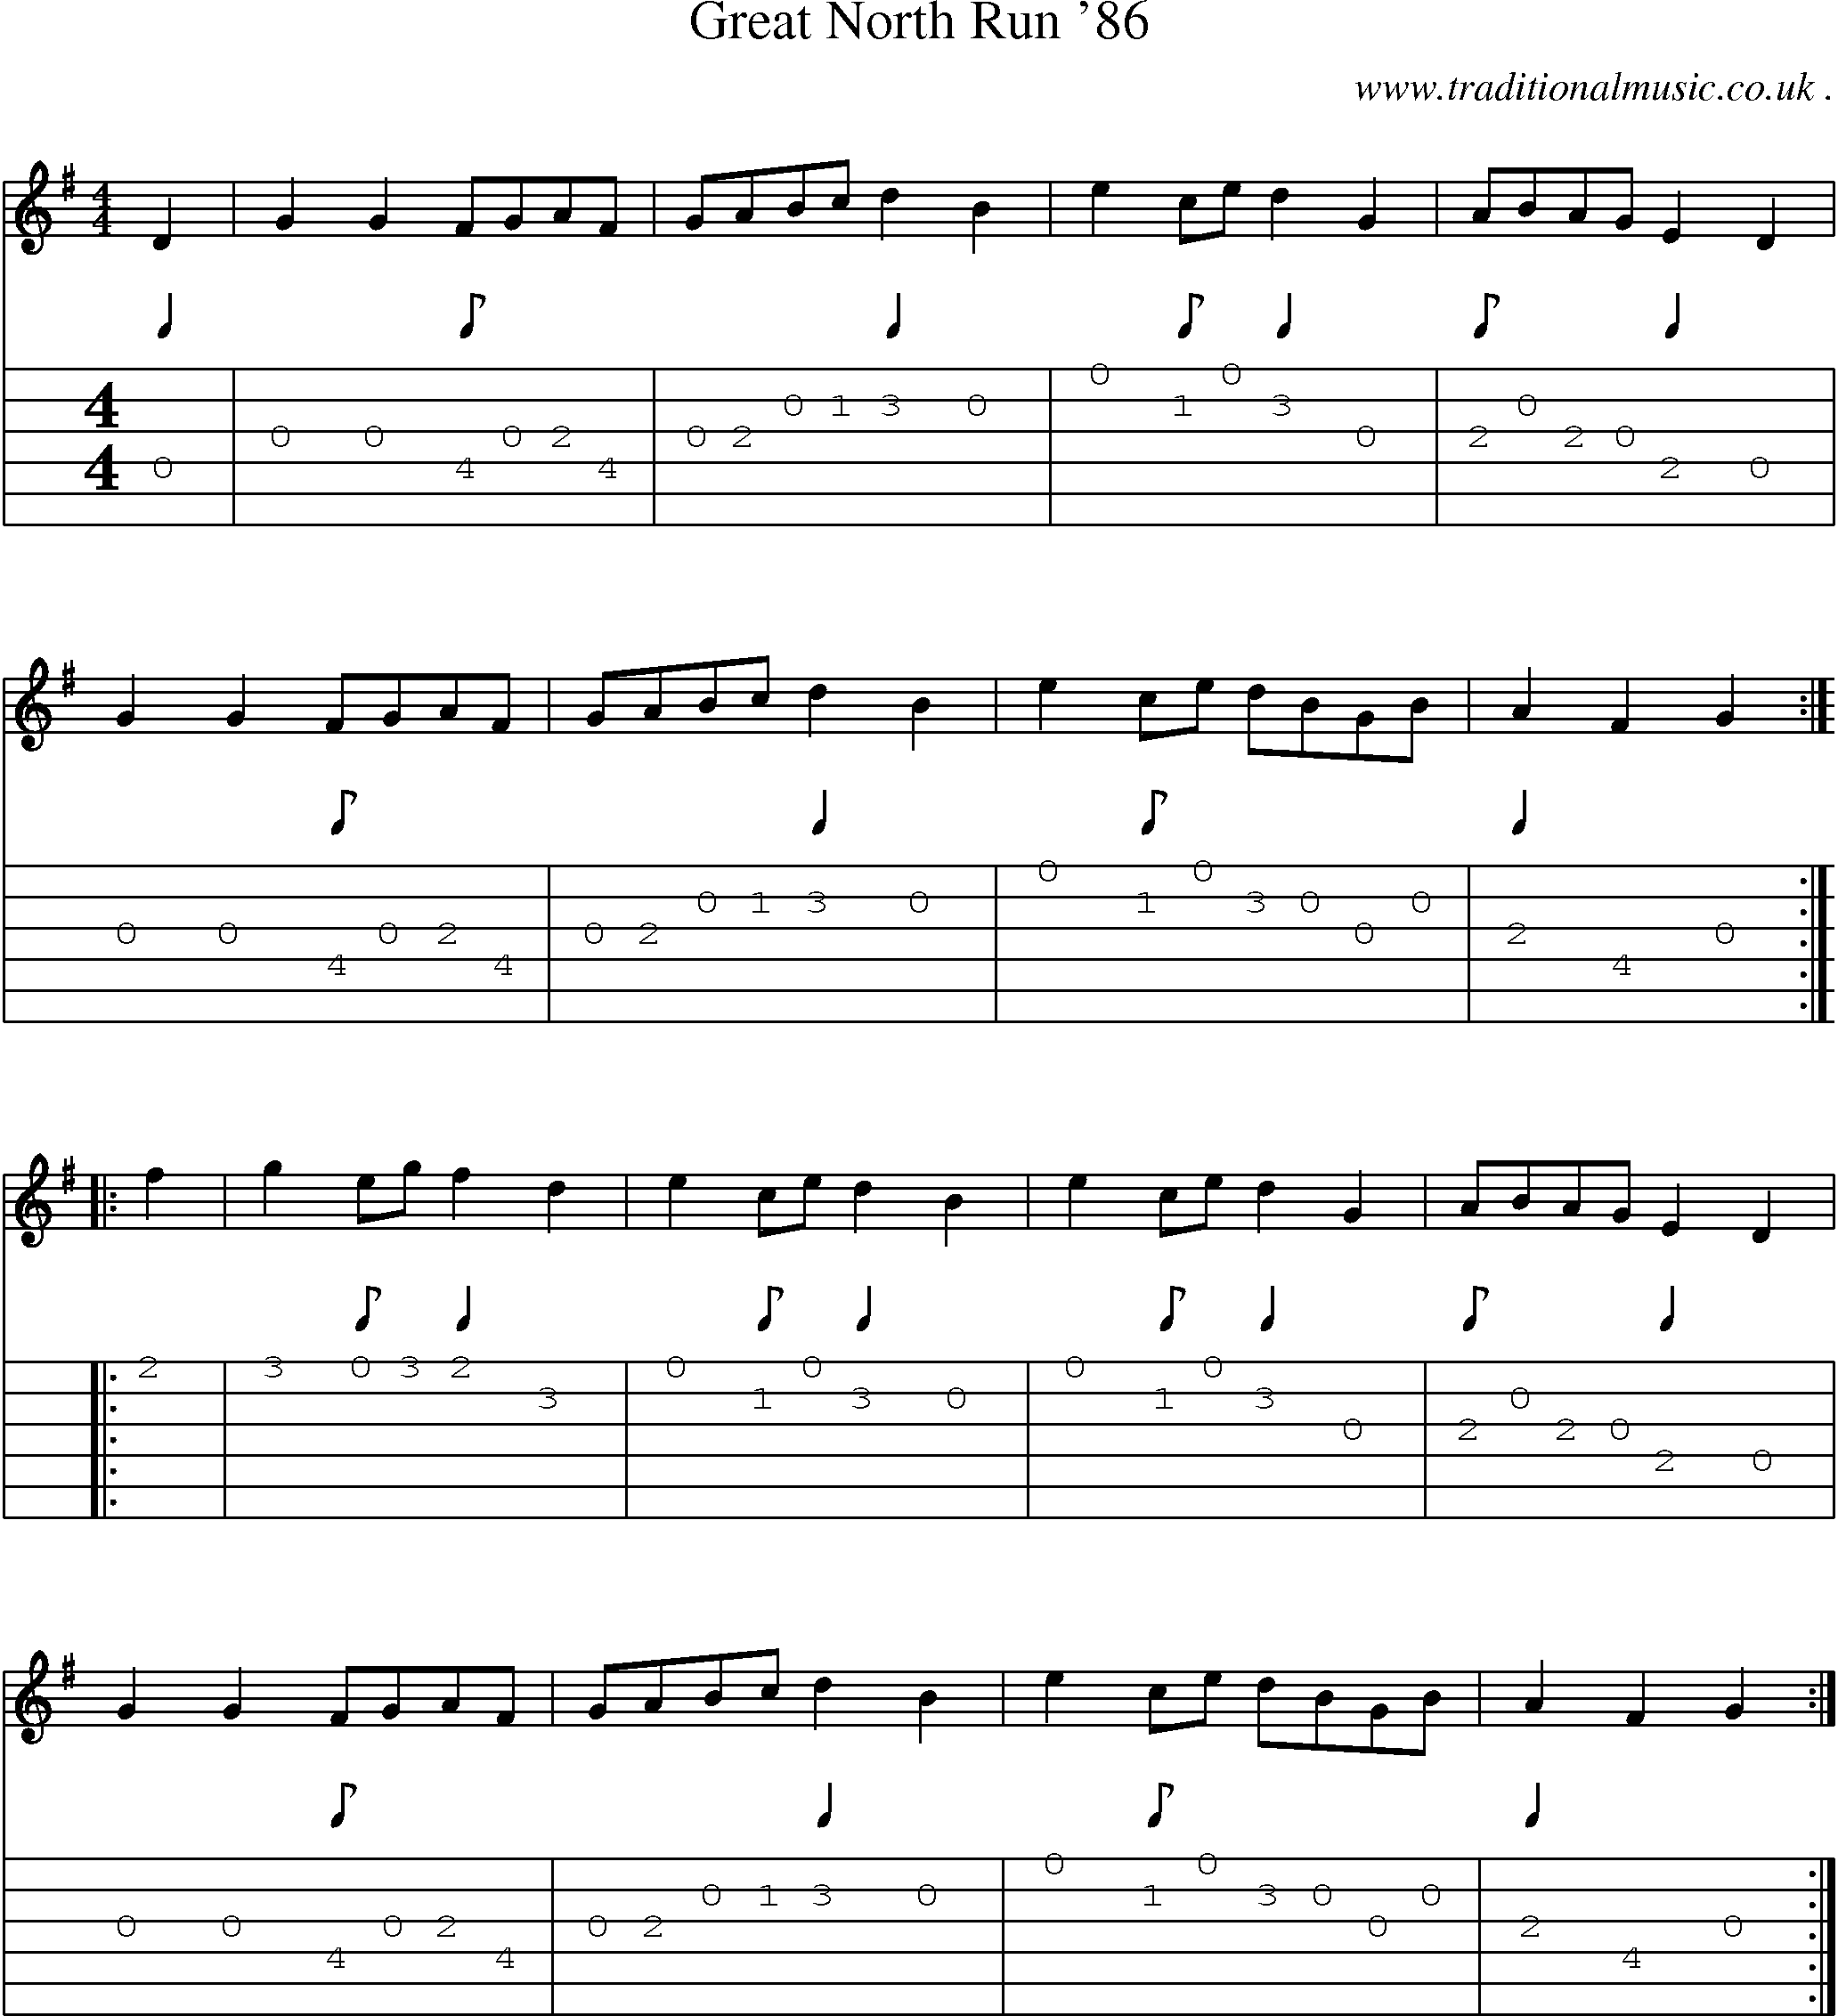 Sheet-Music and Guitar Tabs for Great North Run 86